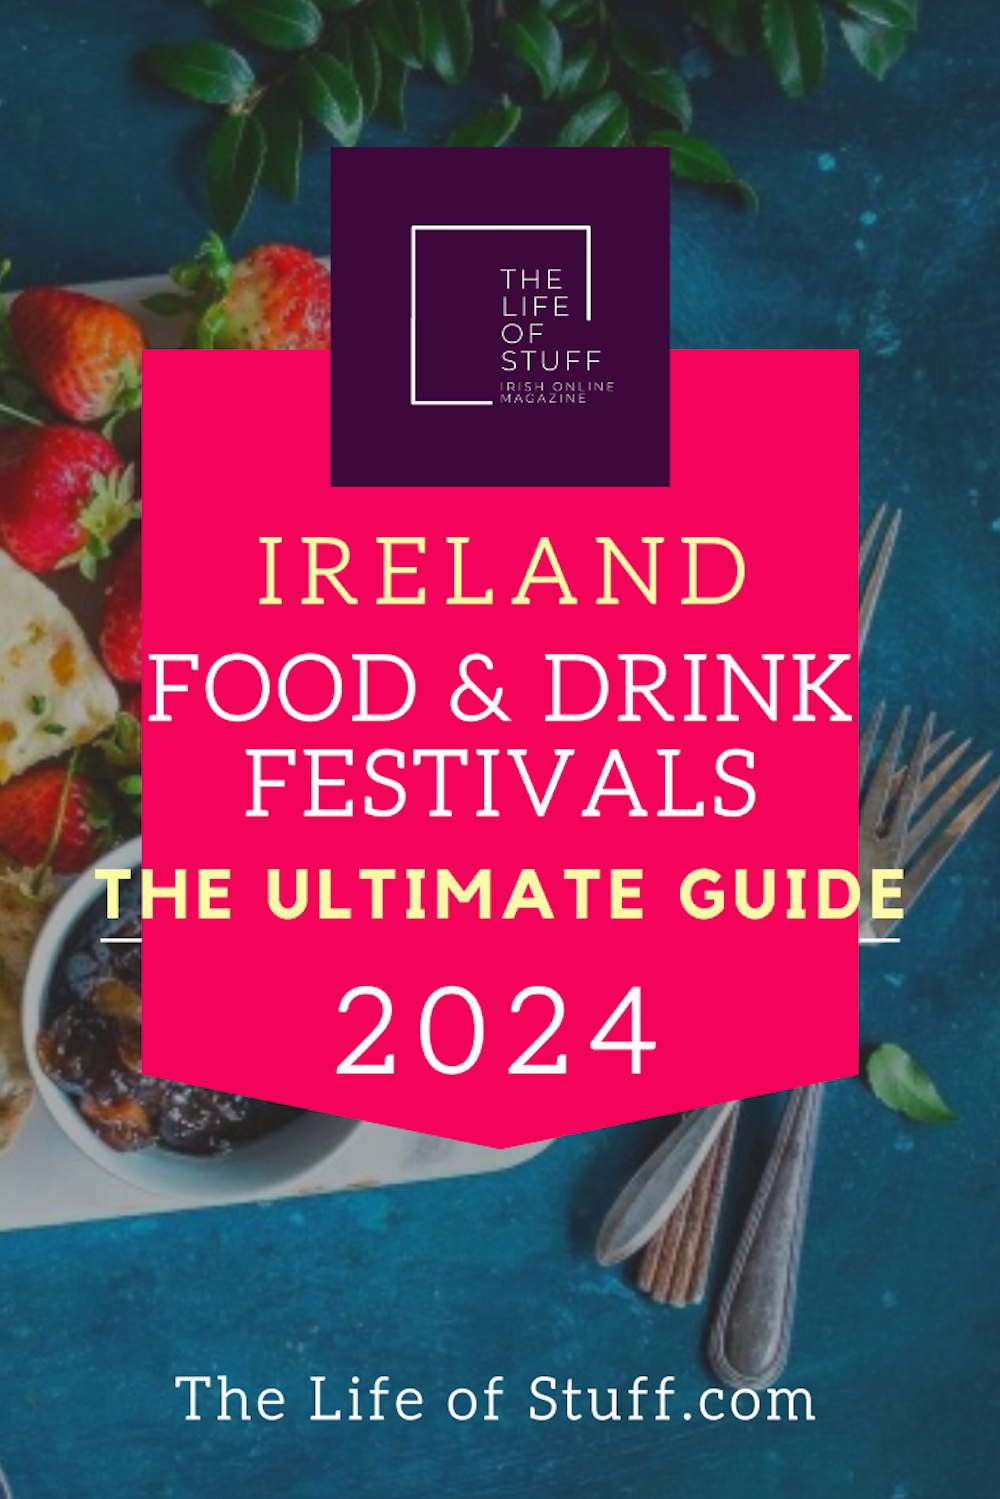 The Ultimate Guide to Food and Drink Festivals Ireland 2024 - The Life of Stuff